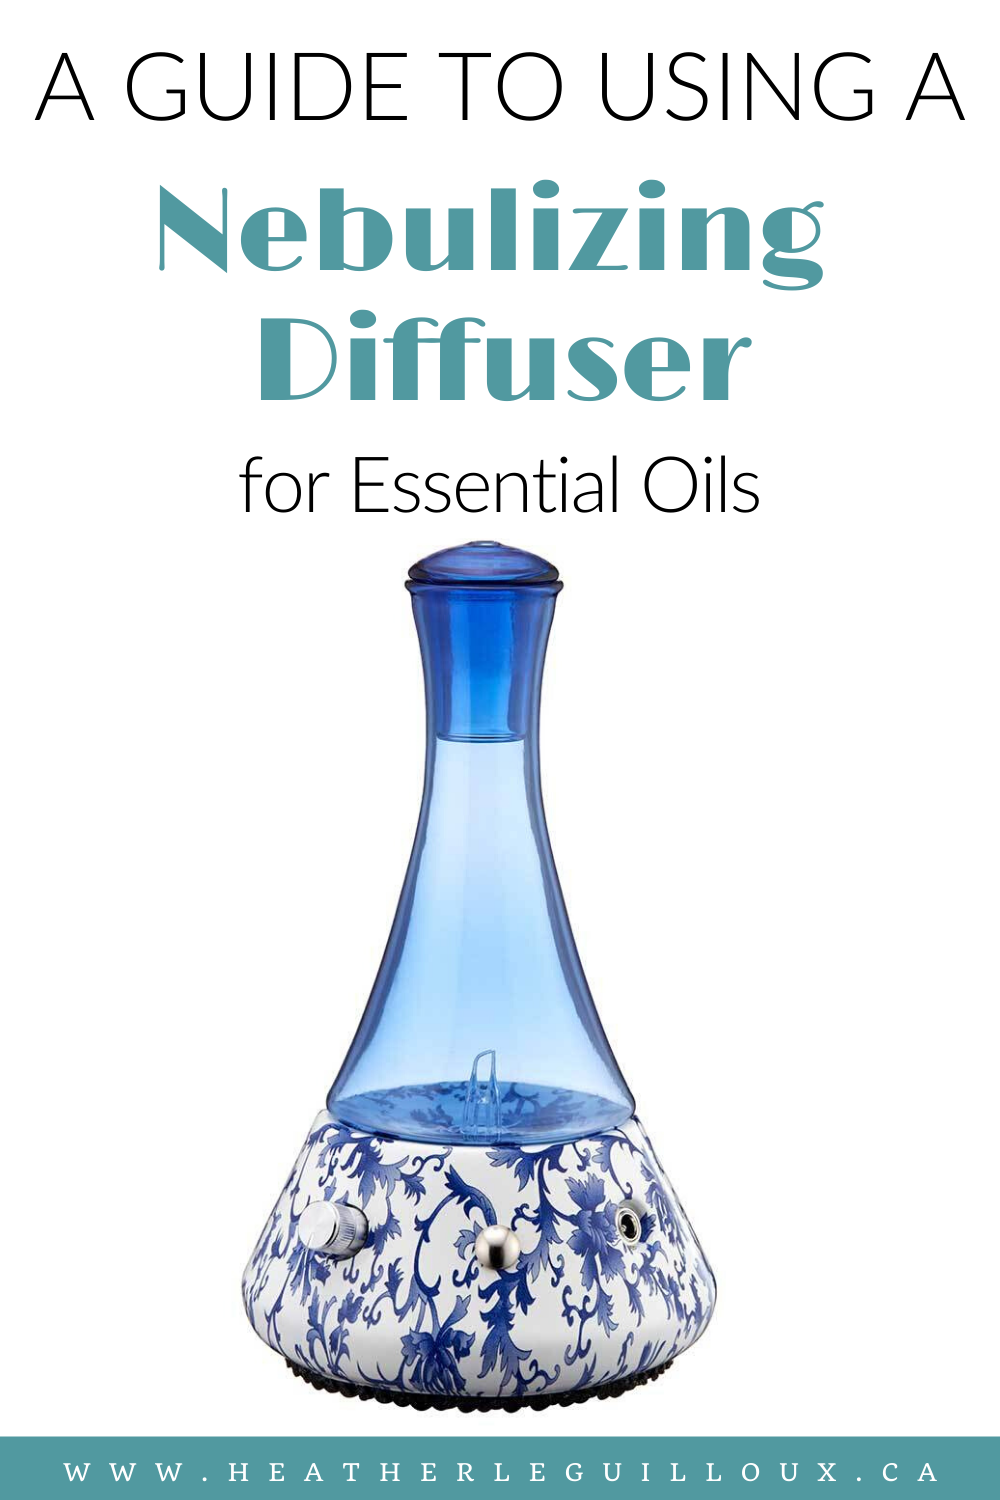 Learn how to use a nebulizing diffuser for essential oils which does not require any water. Simply add your favourite essential oil, turn the on switch, and enjoy relaxing aromatherapy in your home or office! #essentialoils #aromatherapy #nebulizing #diffuser #relax #calm #scent #lavender